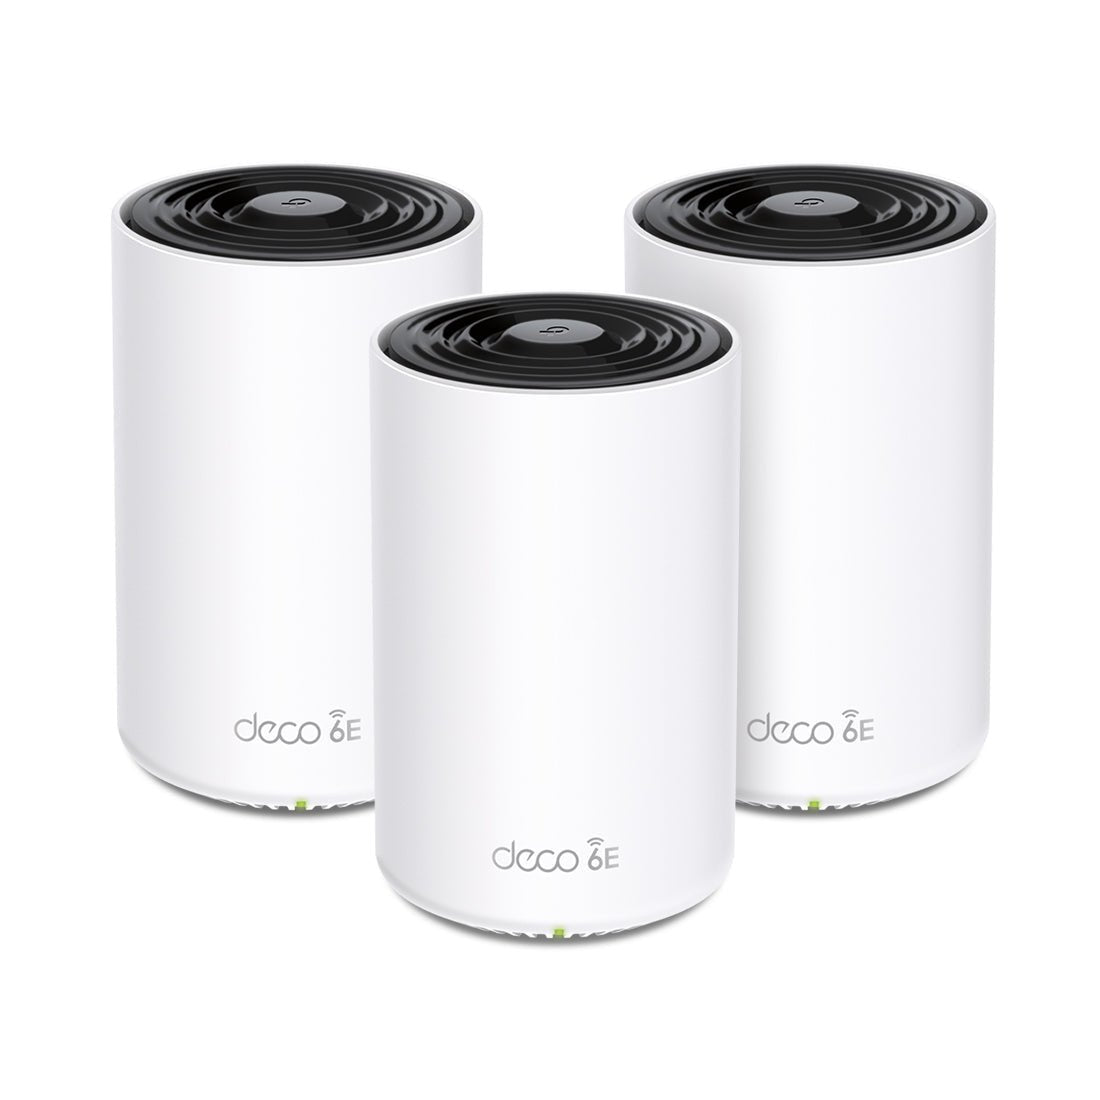 TP-Link Deco XE75 Pro AXE5400 Tri-Band Mesh Wi-Fi 6E System - 3 Pack - راوتر - Store 974 | ستور ٩٧٤